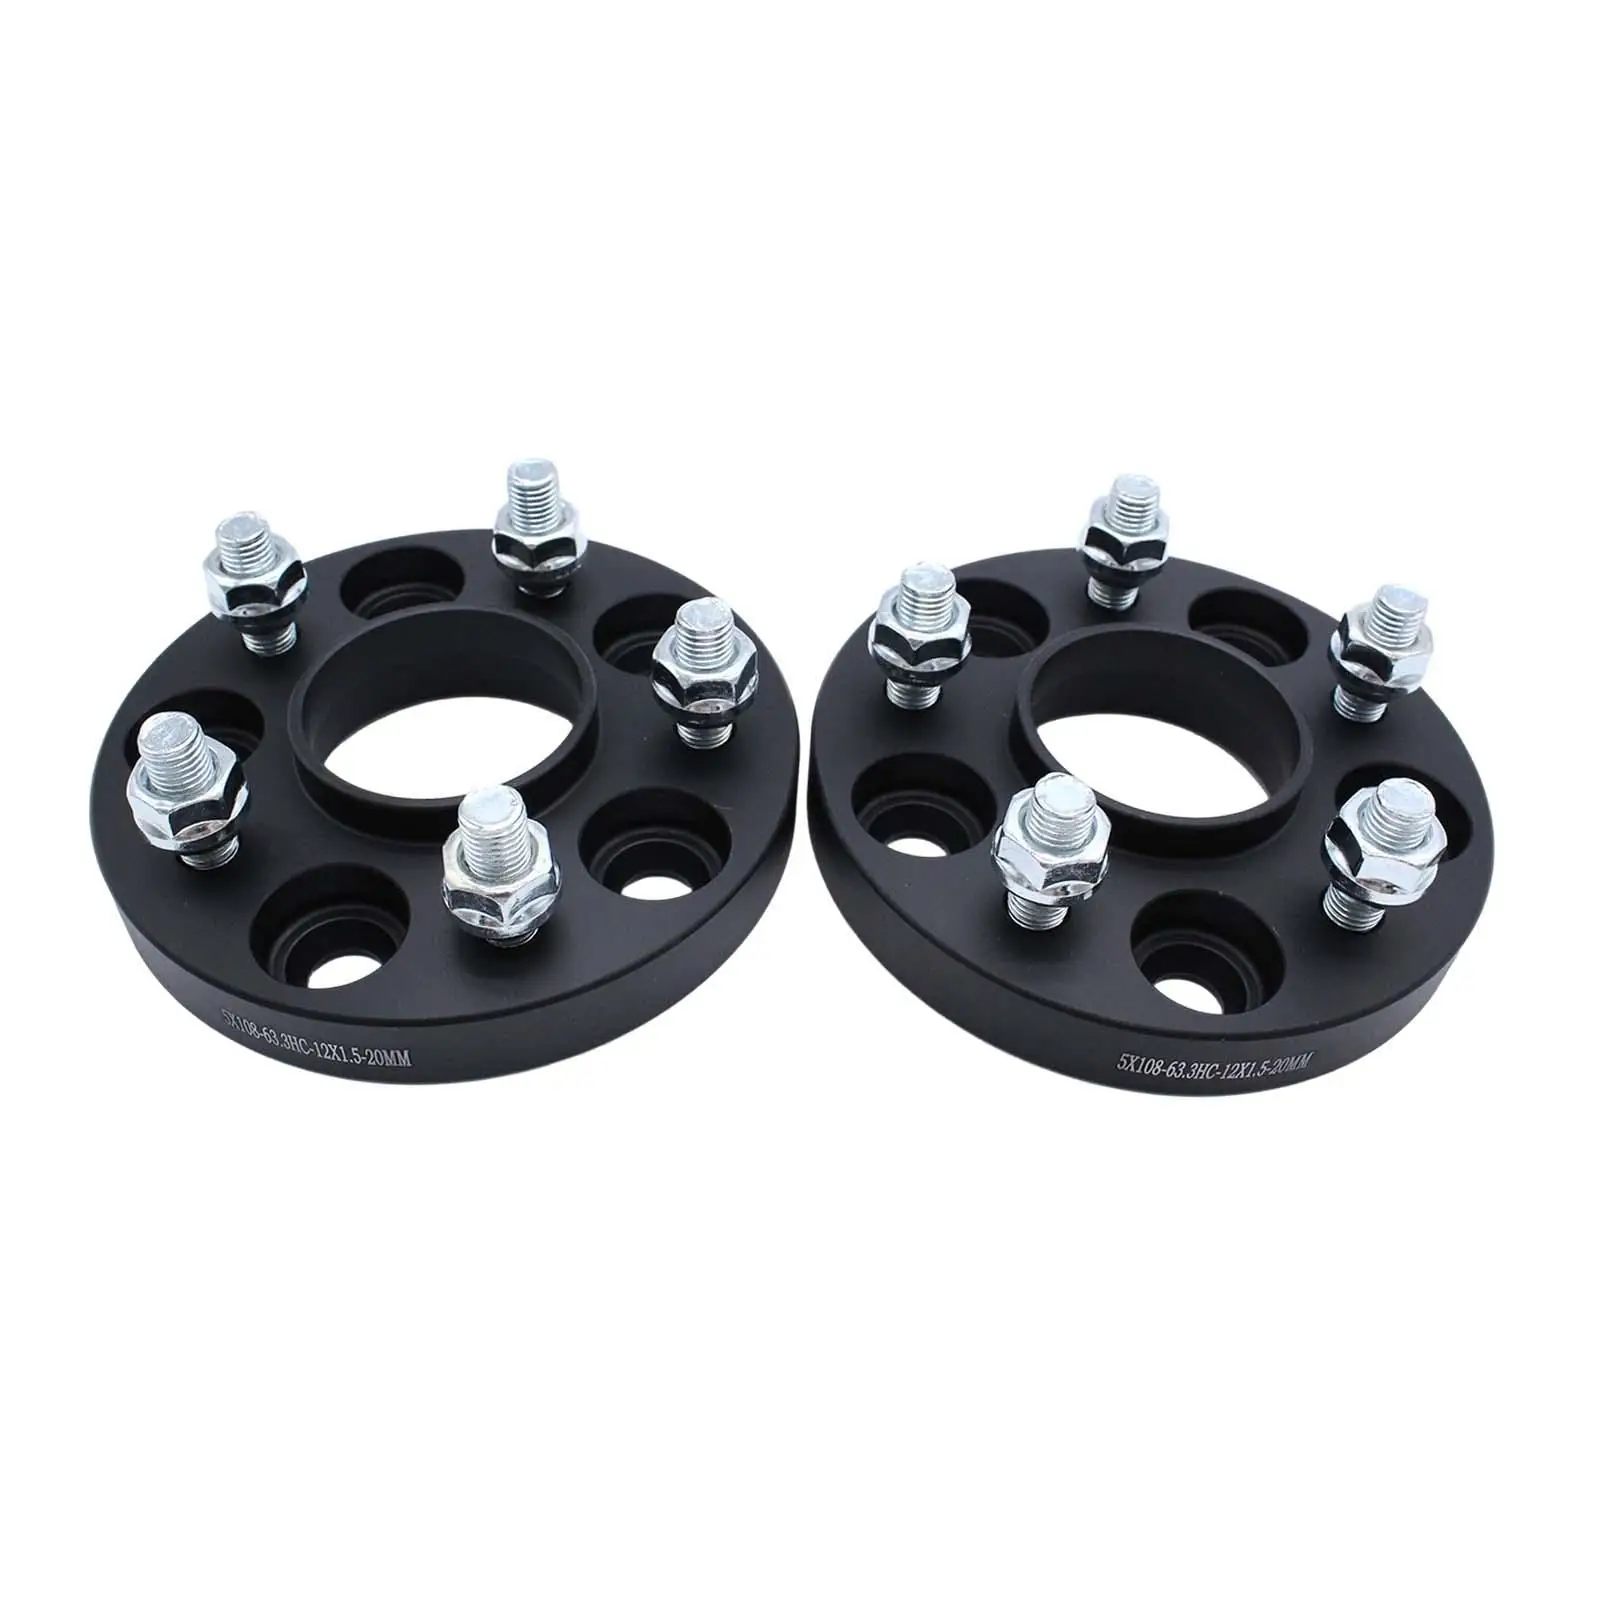 2 Pieces Hubcentric Wheel Spacers Wheel Adapters Spacers for Ford MK3 2011-2018 MK2 2005-2011 Automotive Accessories